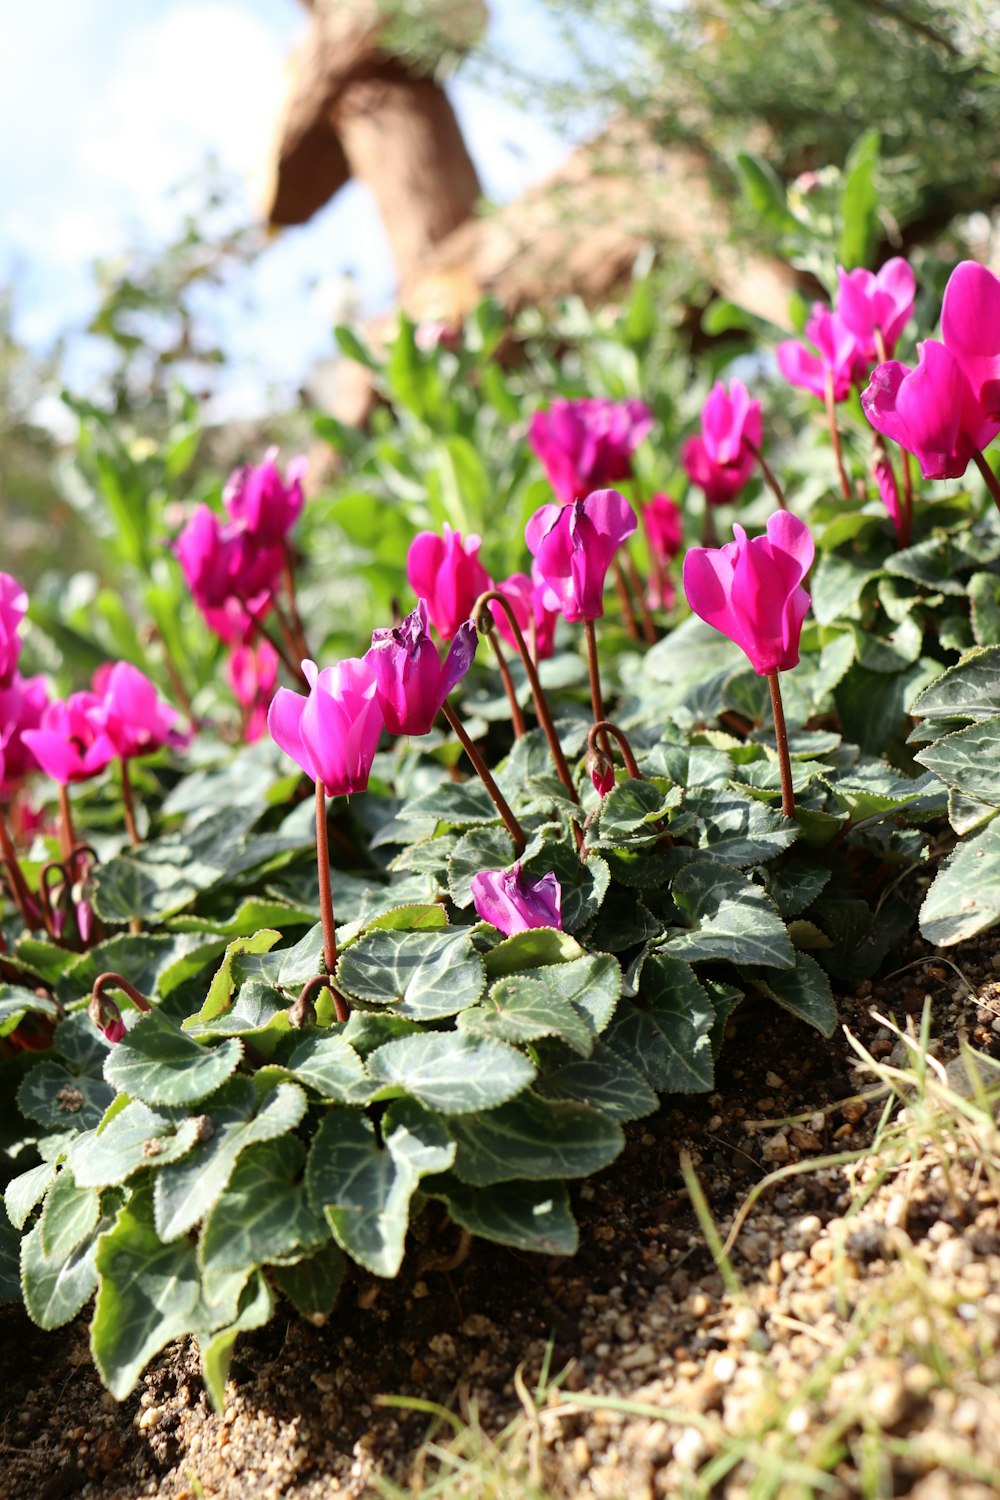 a group of pink flowers growing in the dirt